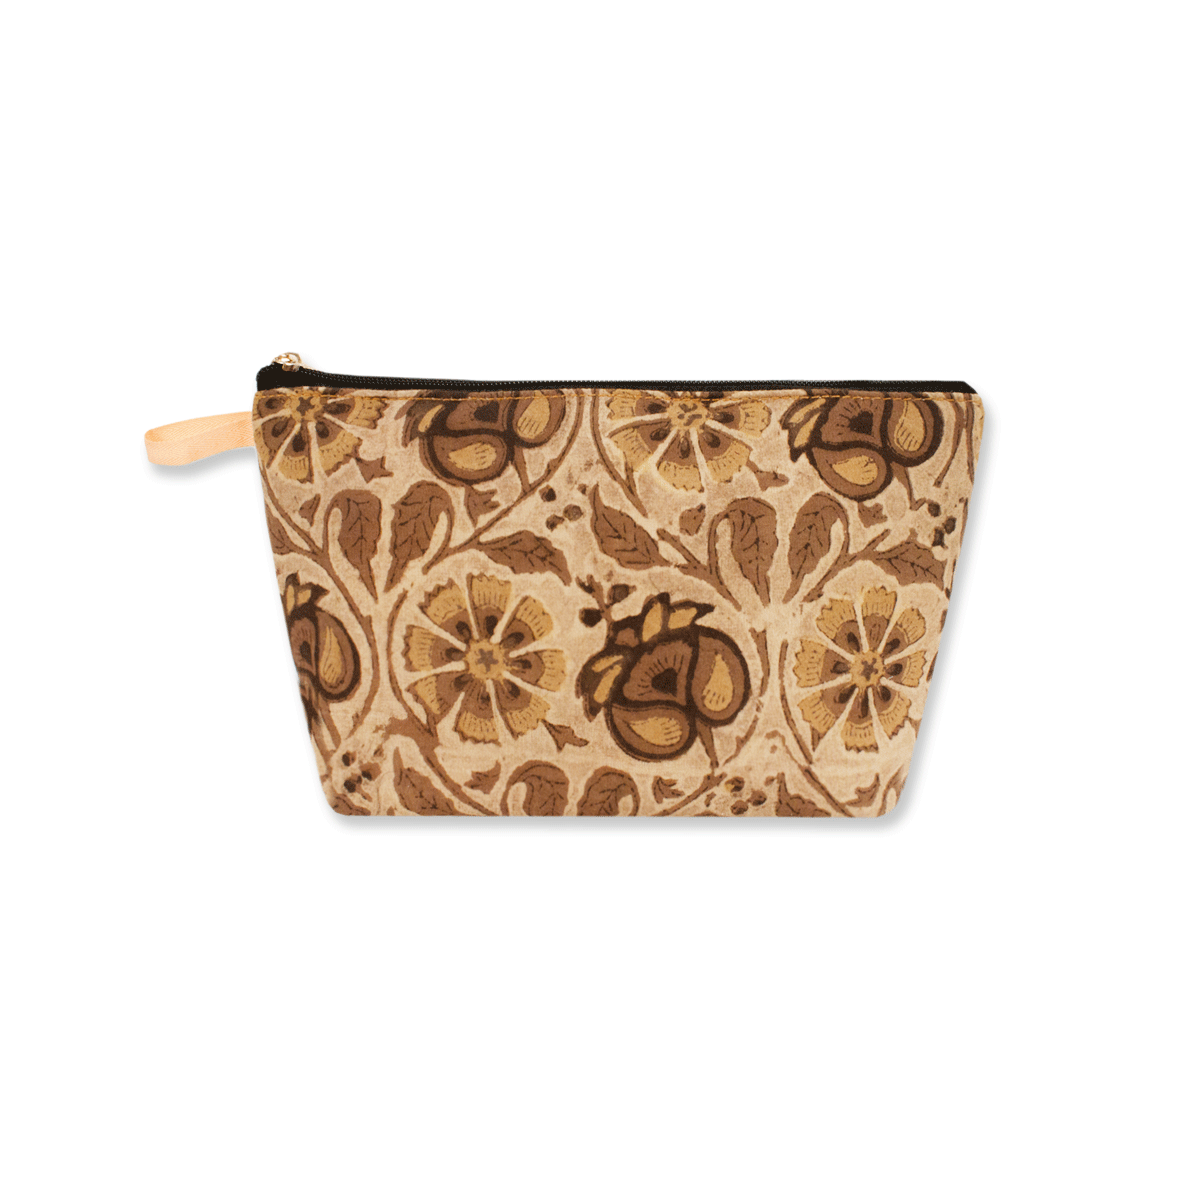 Mughal Floral Block Printed Pouch